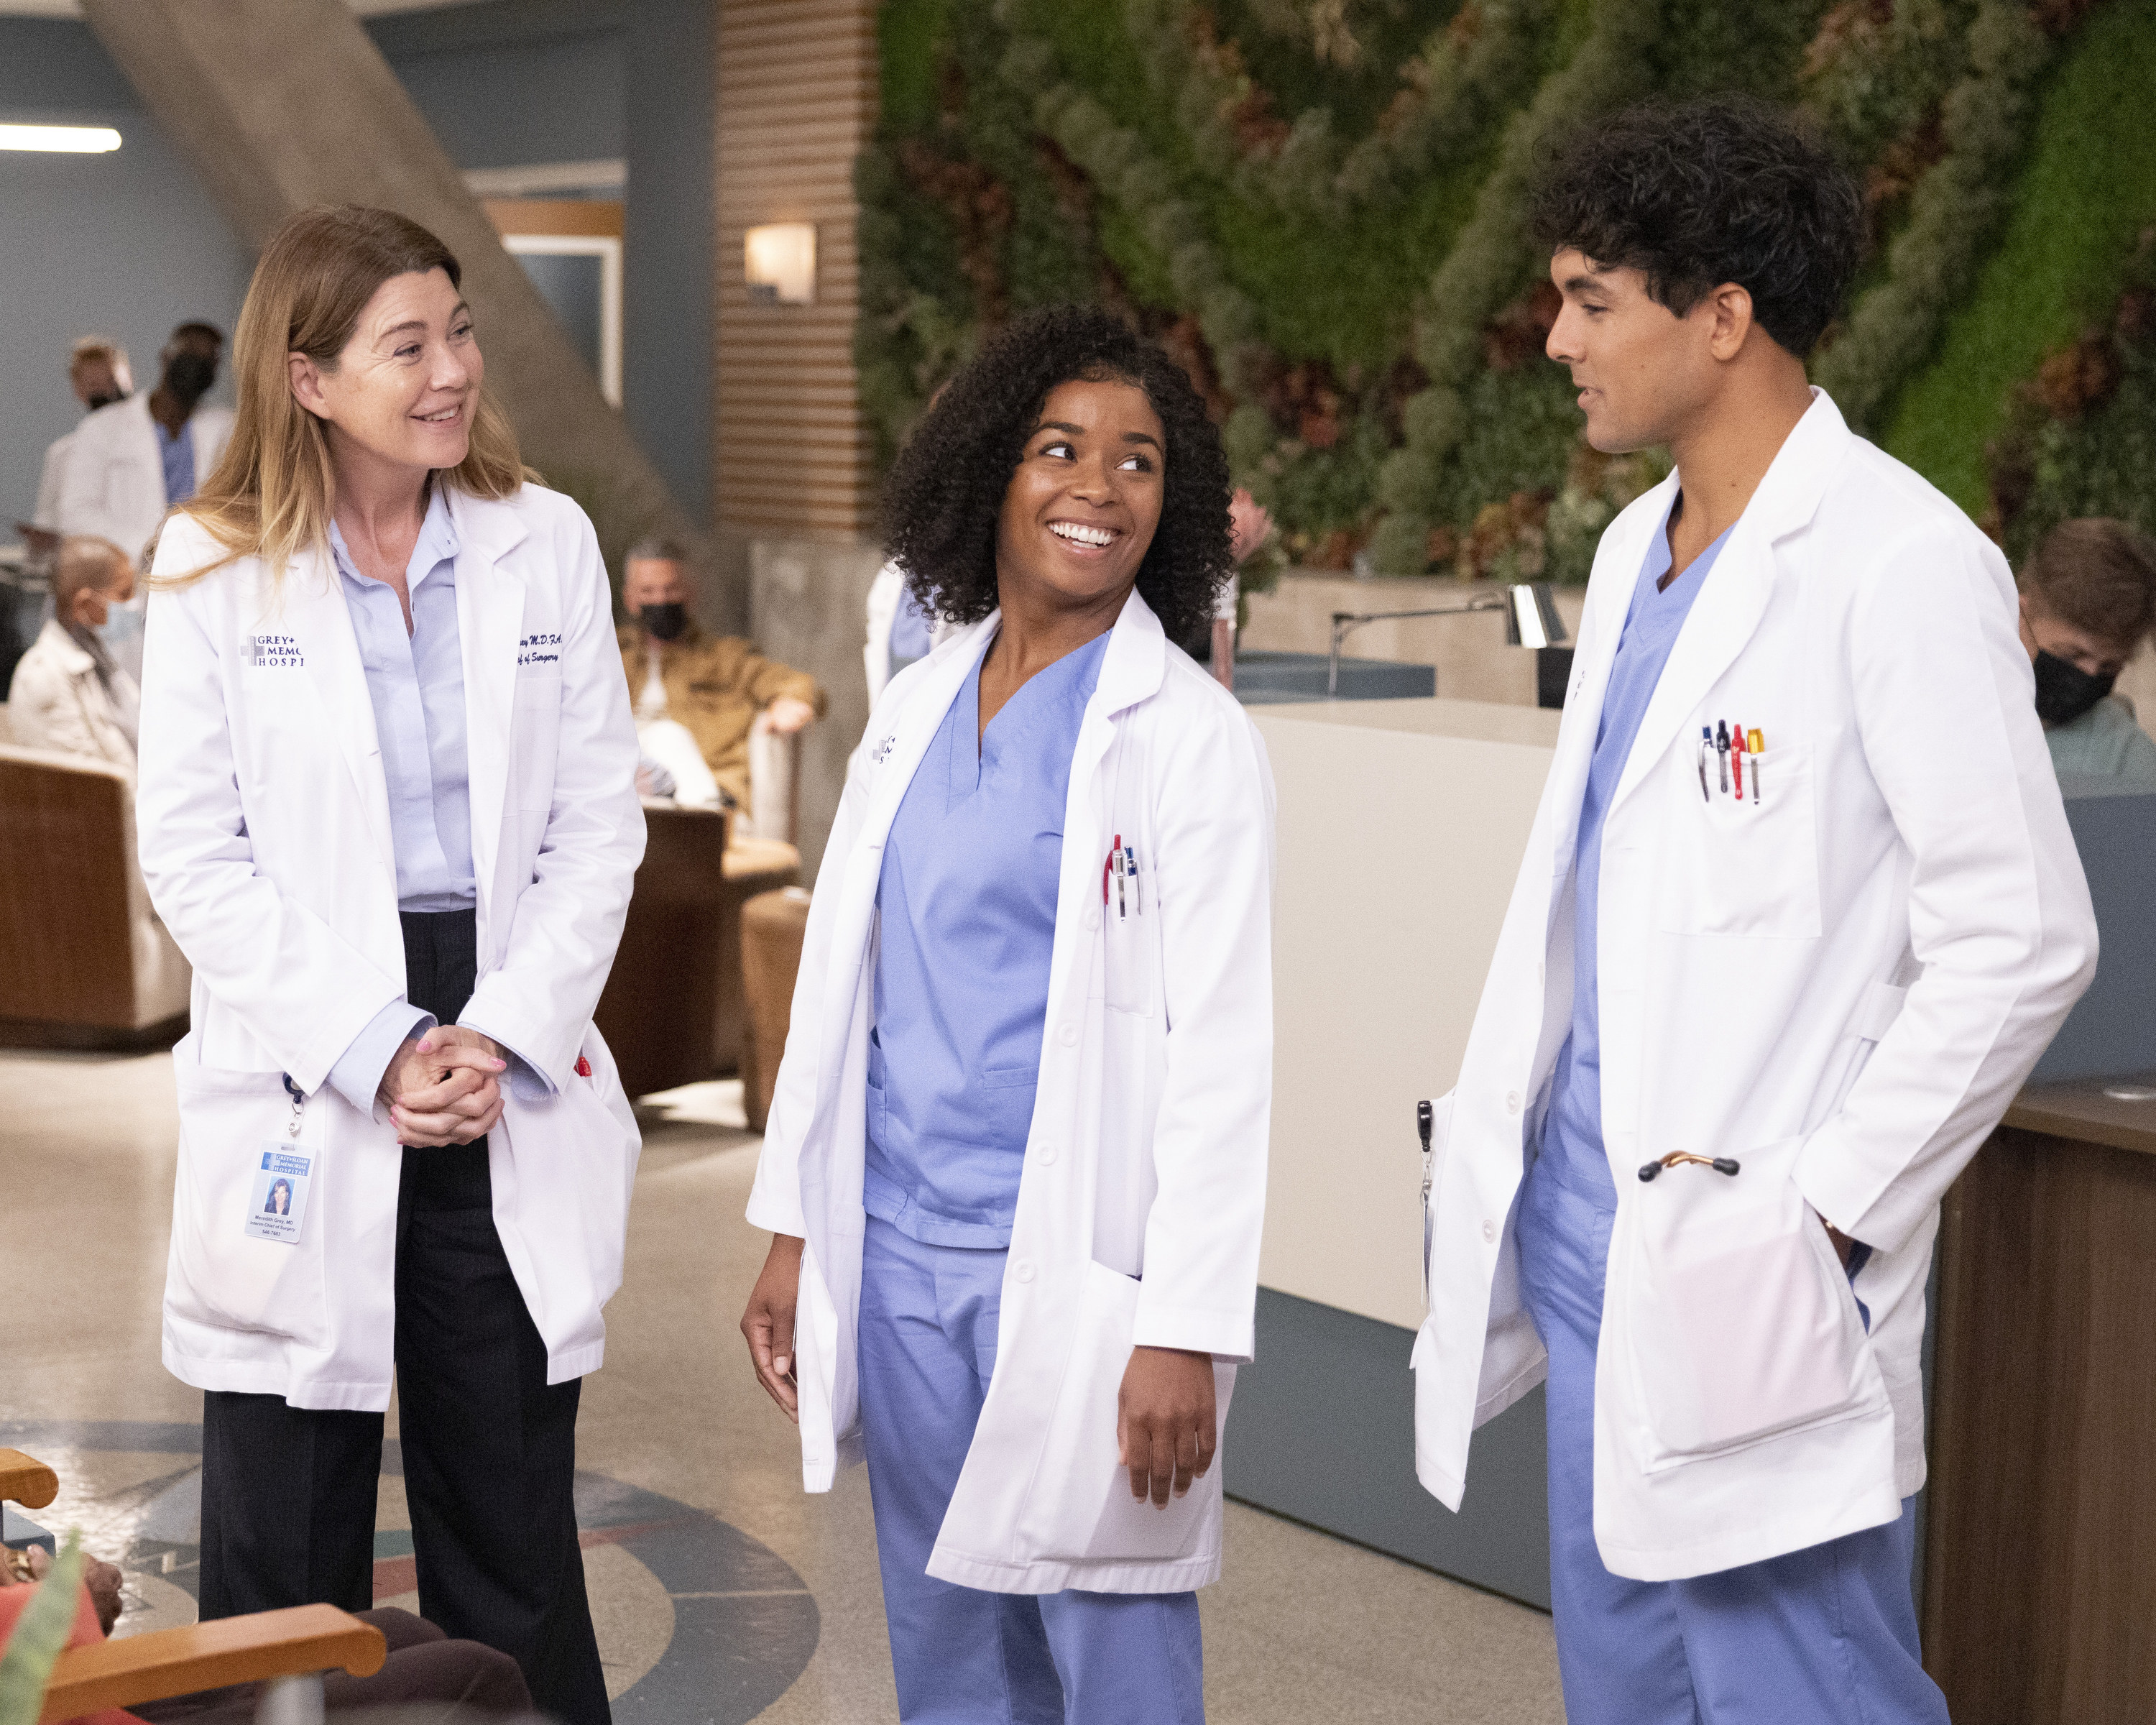 Meredith with new interns